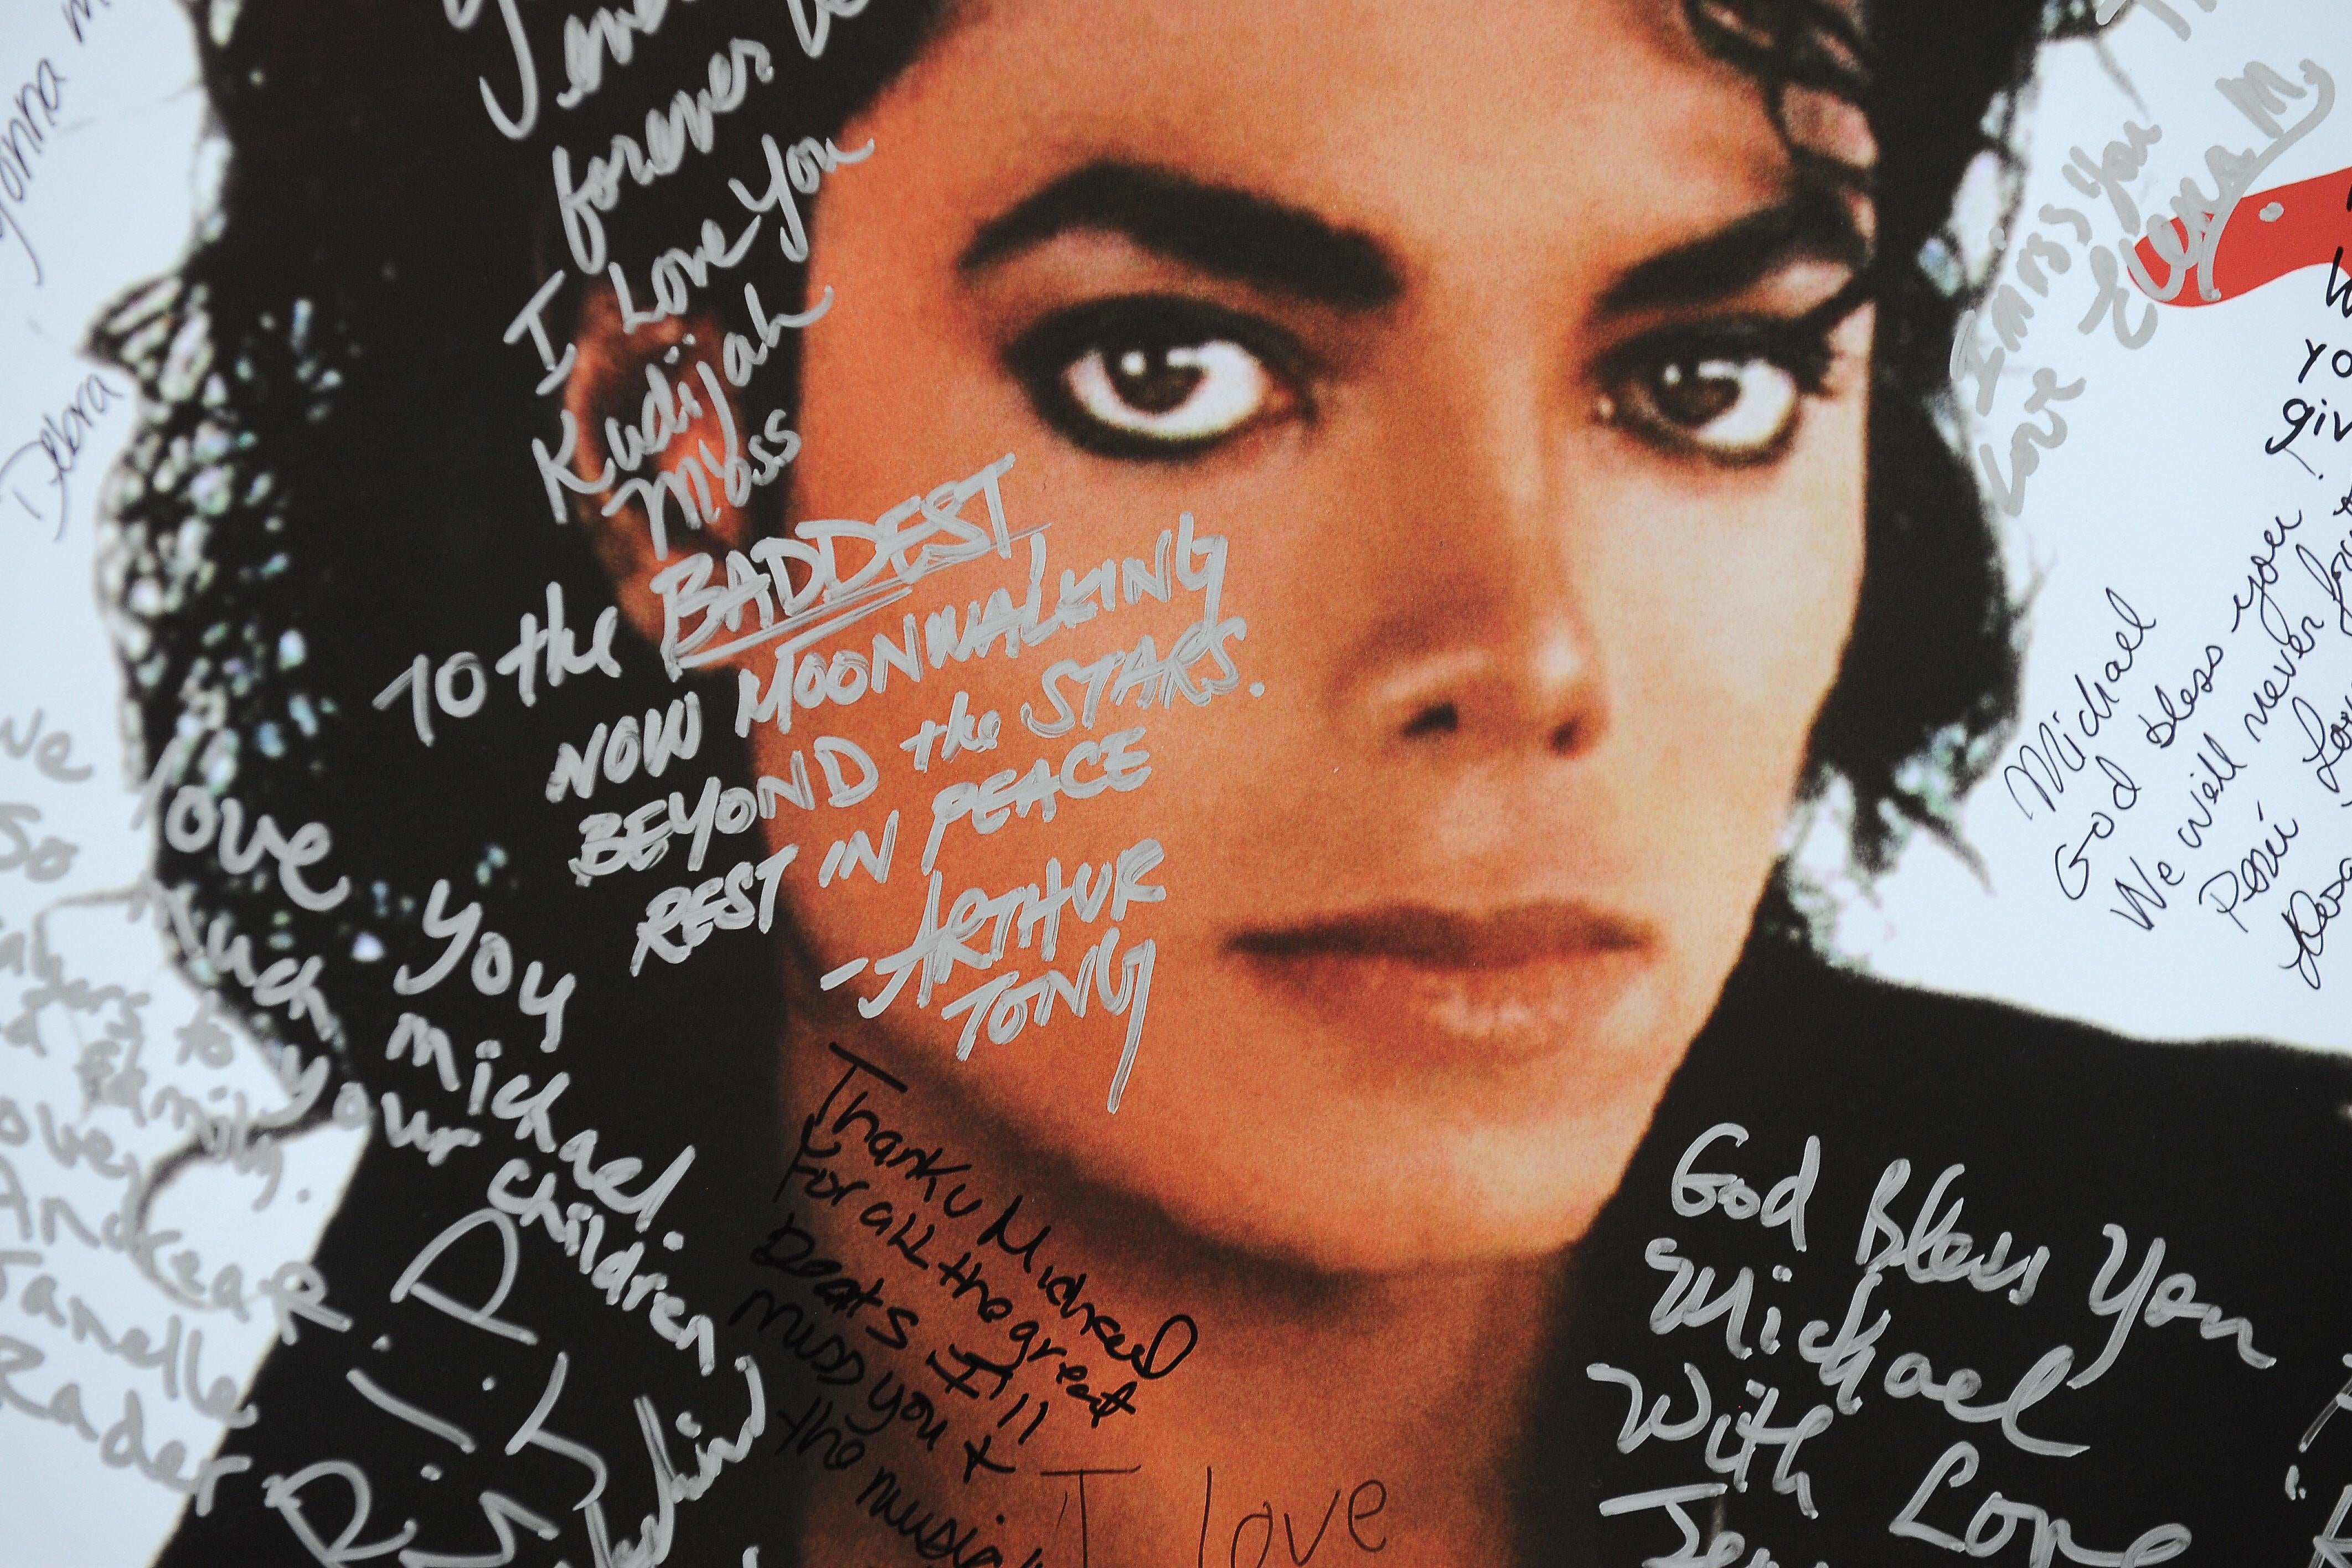 A poster of Michael Jackson with scribbles on it.